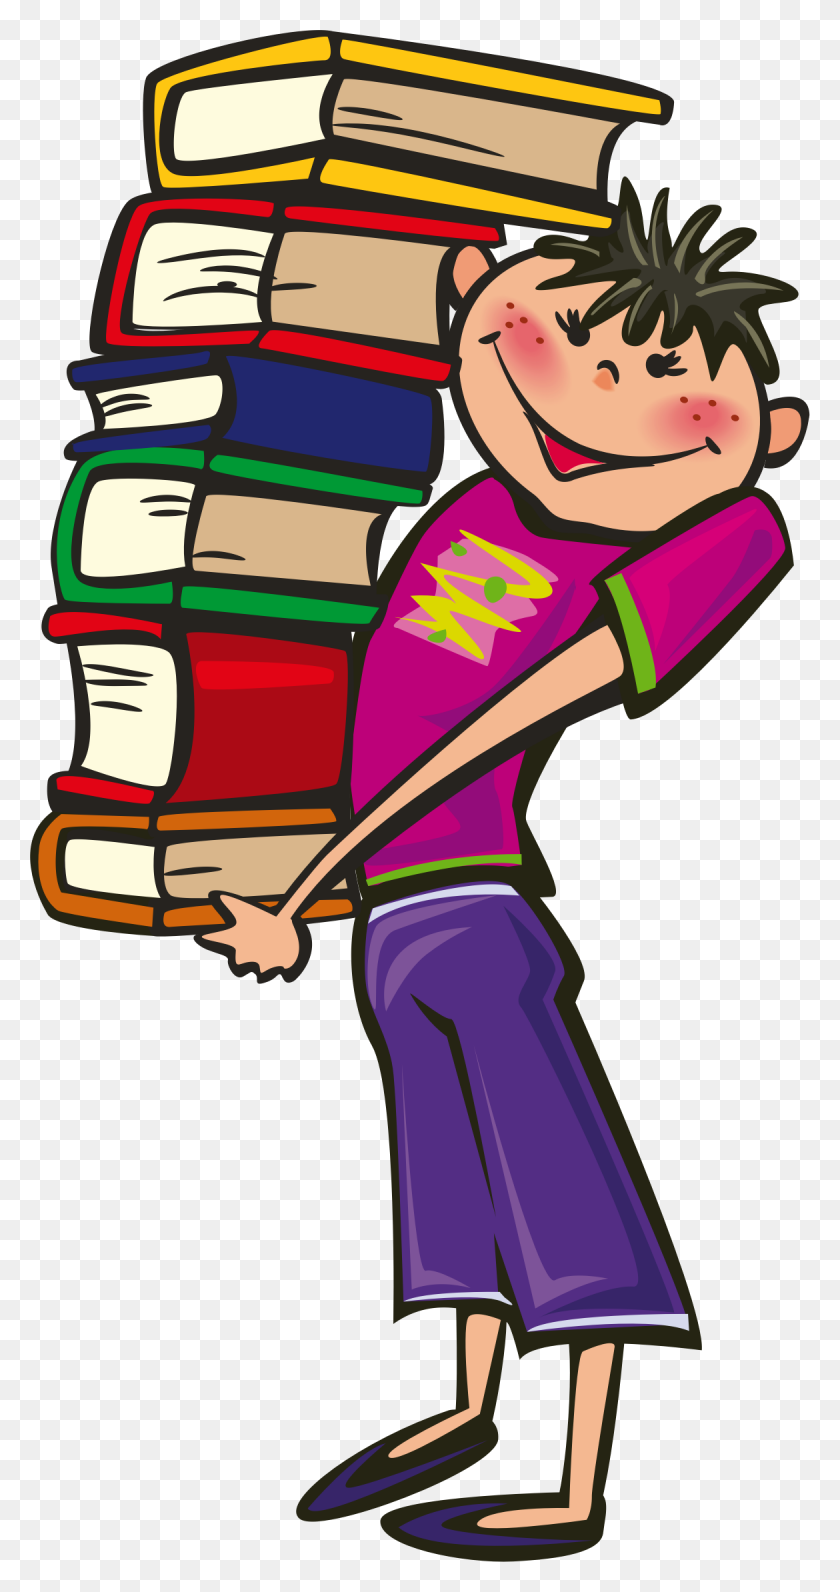 1170x2298 Boy And Books Clip Art Imagenes Clip Art, School - Waking Up Early Clipart